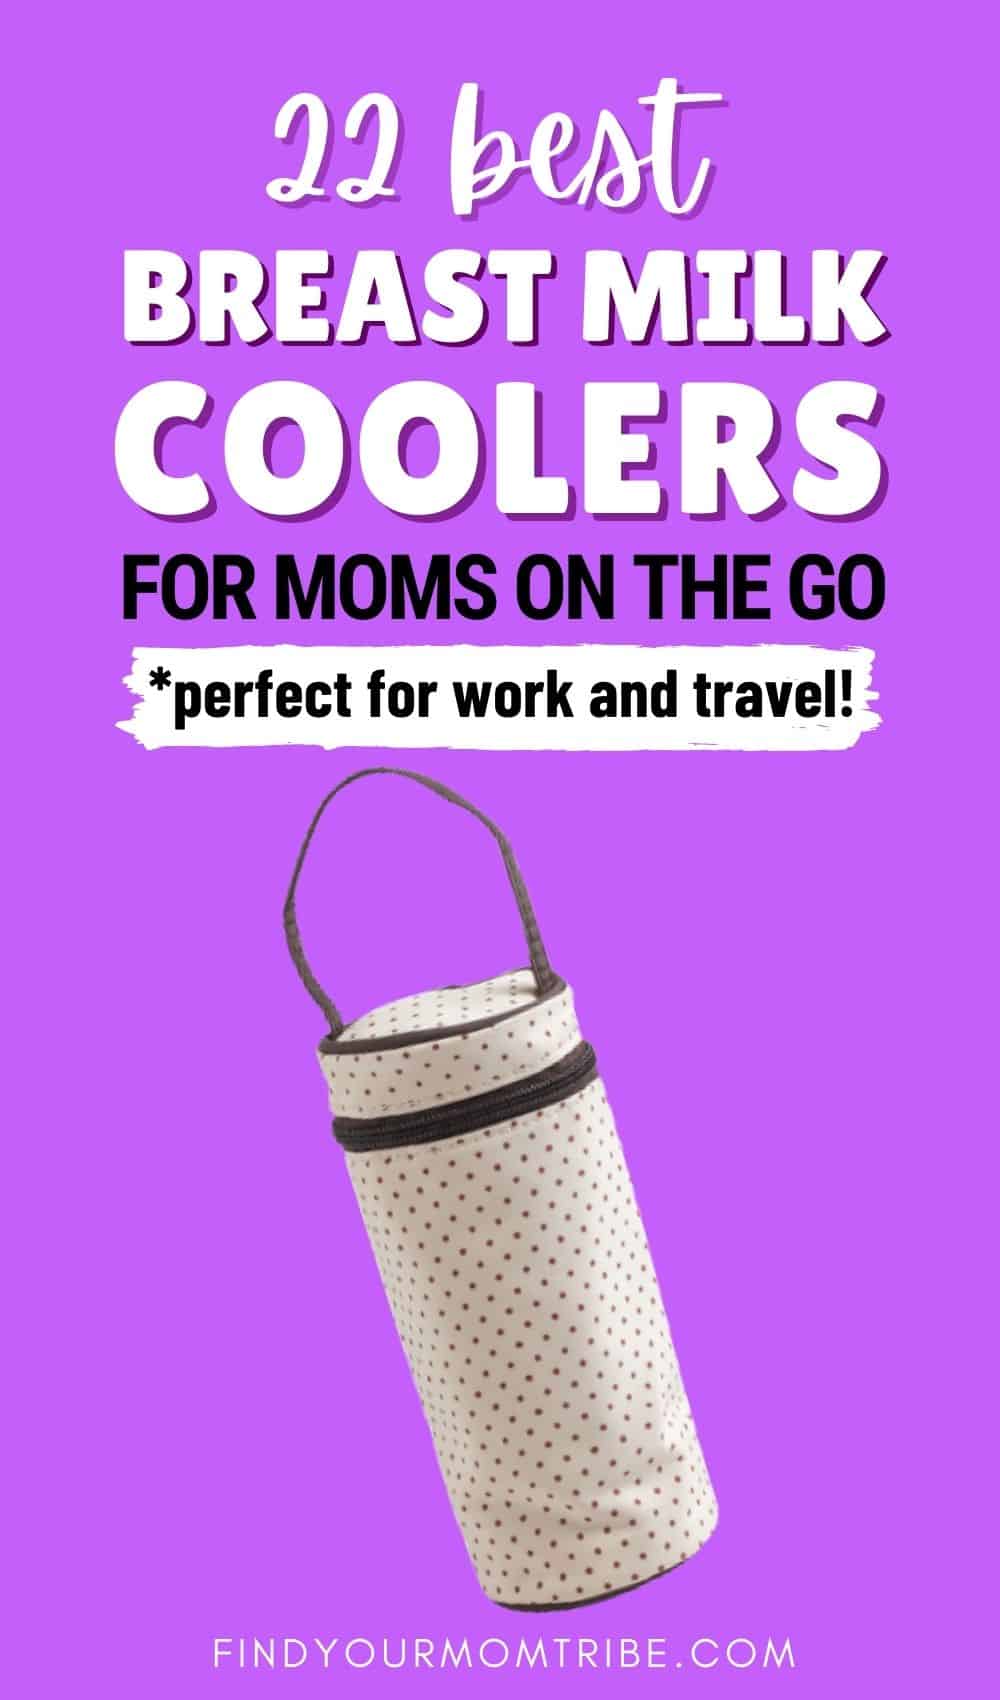 22 Best Breast Milk Coolers For Moms On The Go In 2021